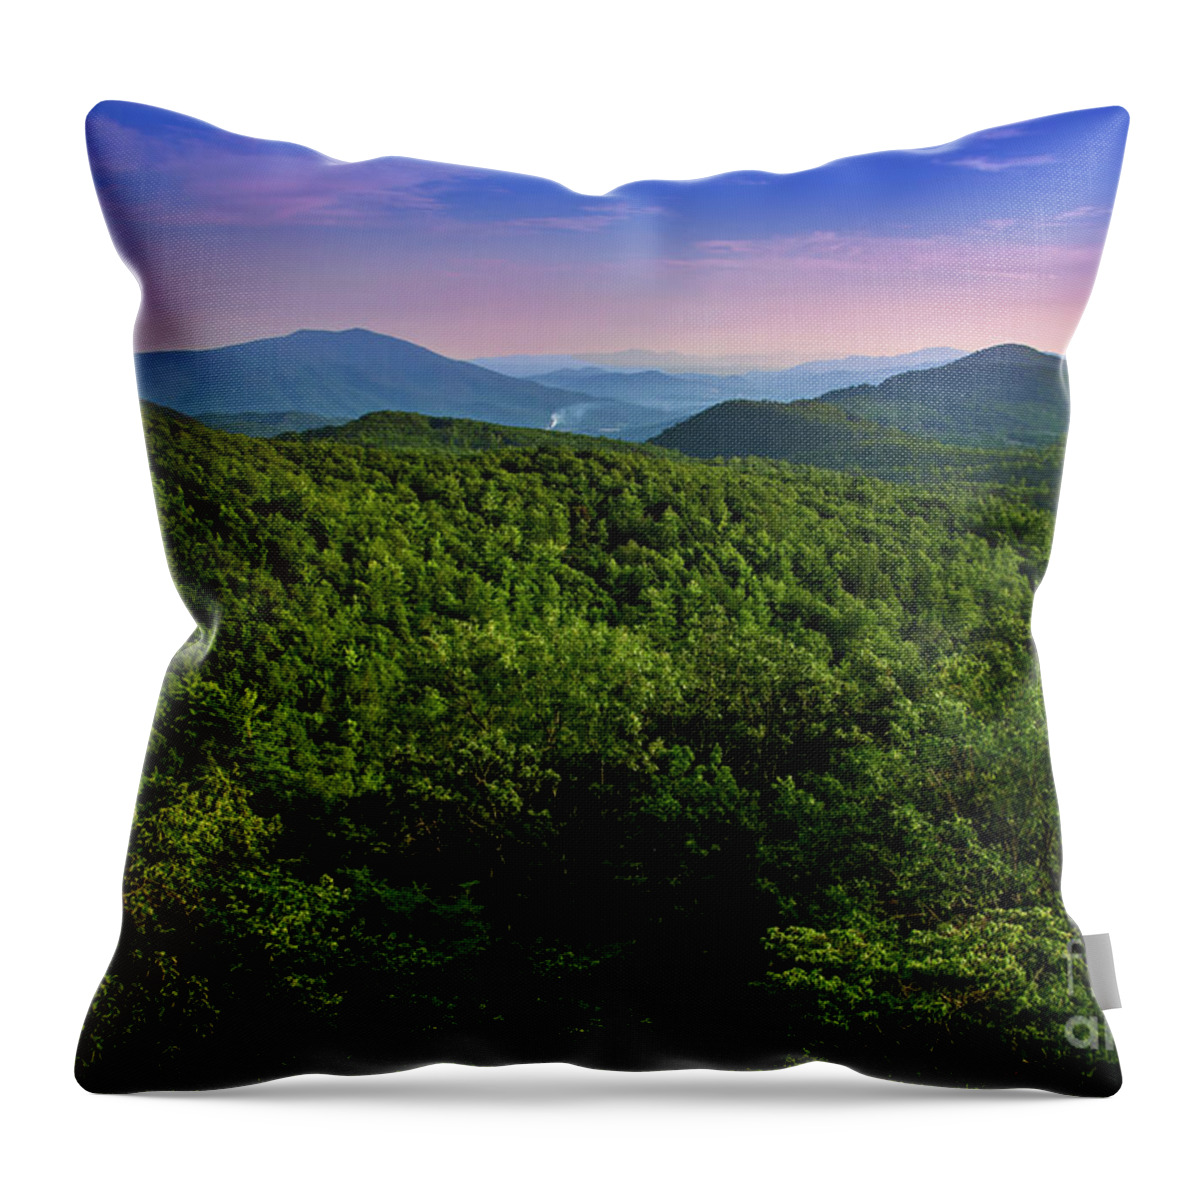 Grayson Highlands Throw Pillow featuring the photograph Grayson Highlands at Sunset by Shelia Hunt